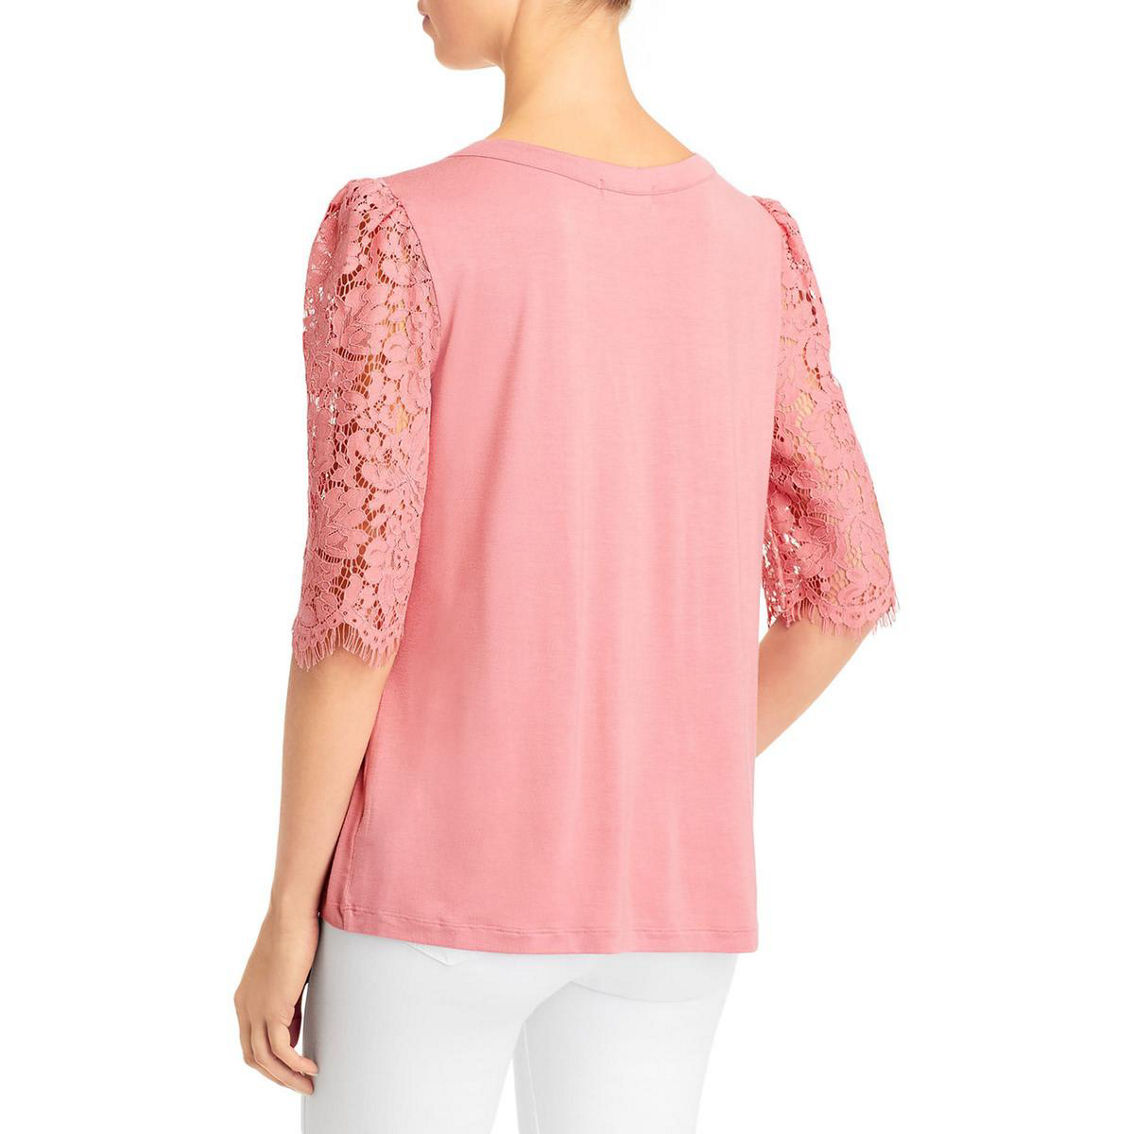 Womens Knit Lace Blouse - Image 2 of 3